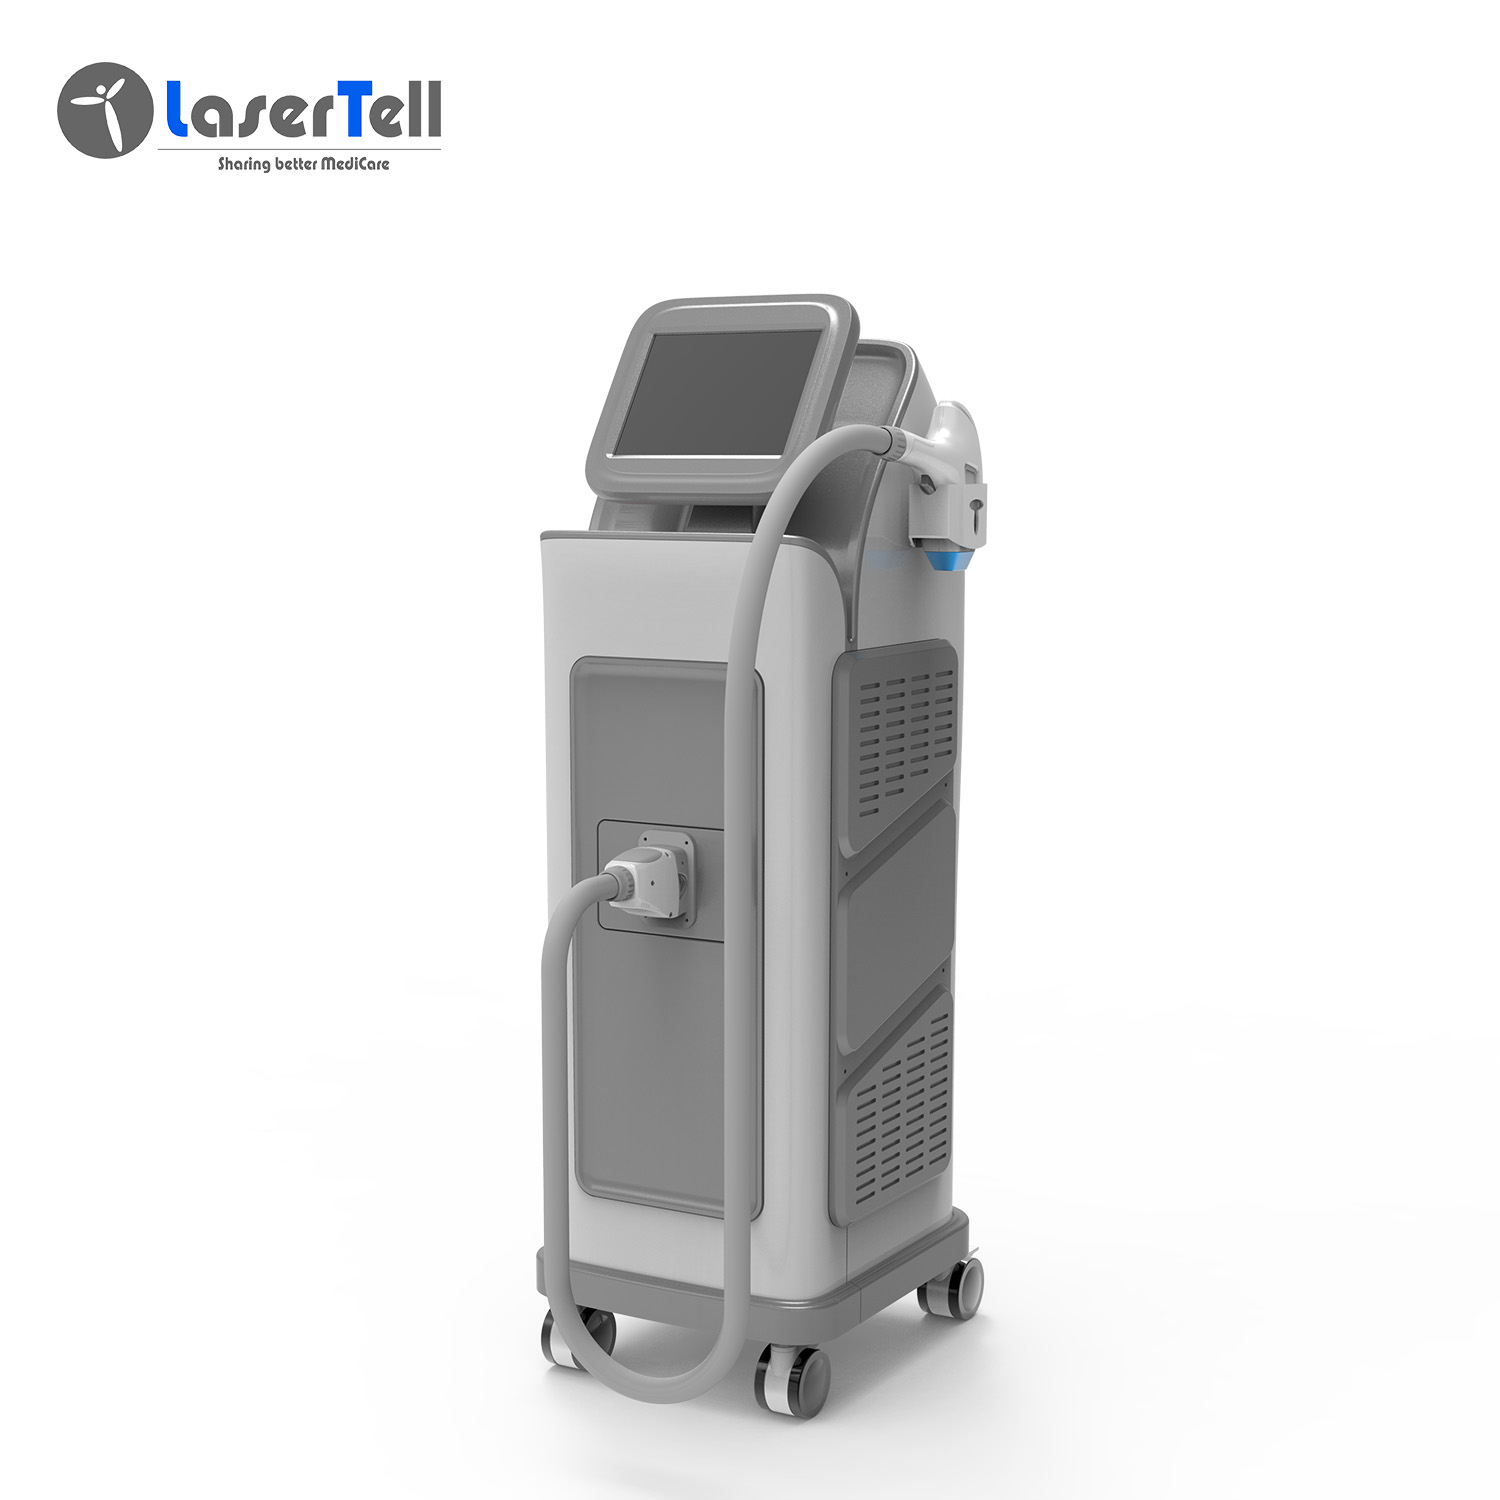 2020 LaserTell new design 1500 watts laser hair removal machine deals factory price hot sale big spot Featured Image